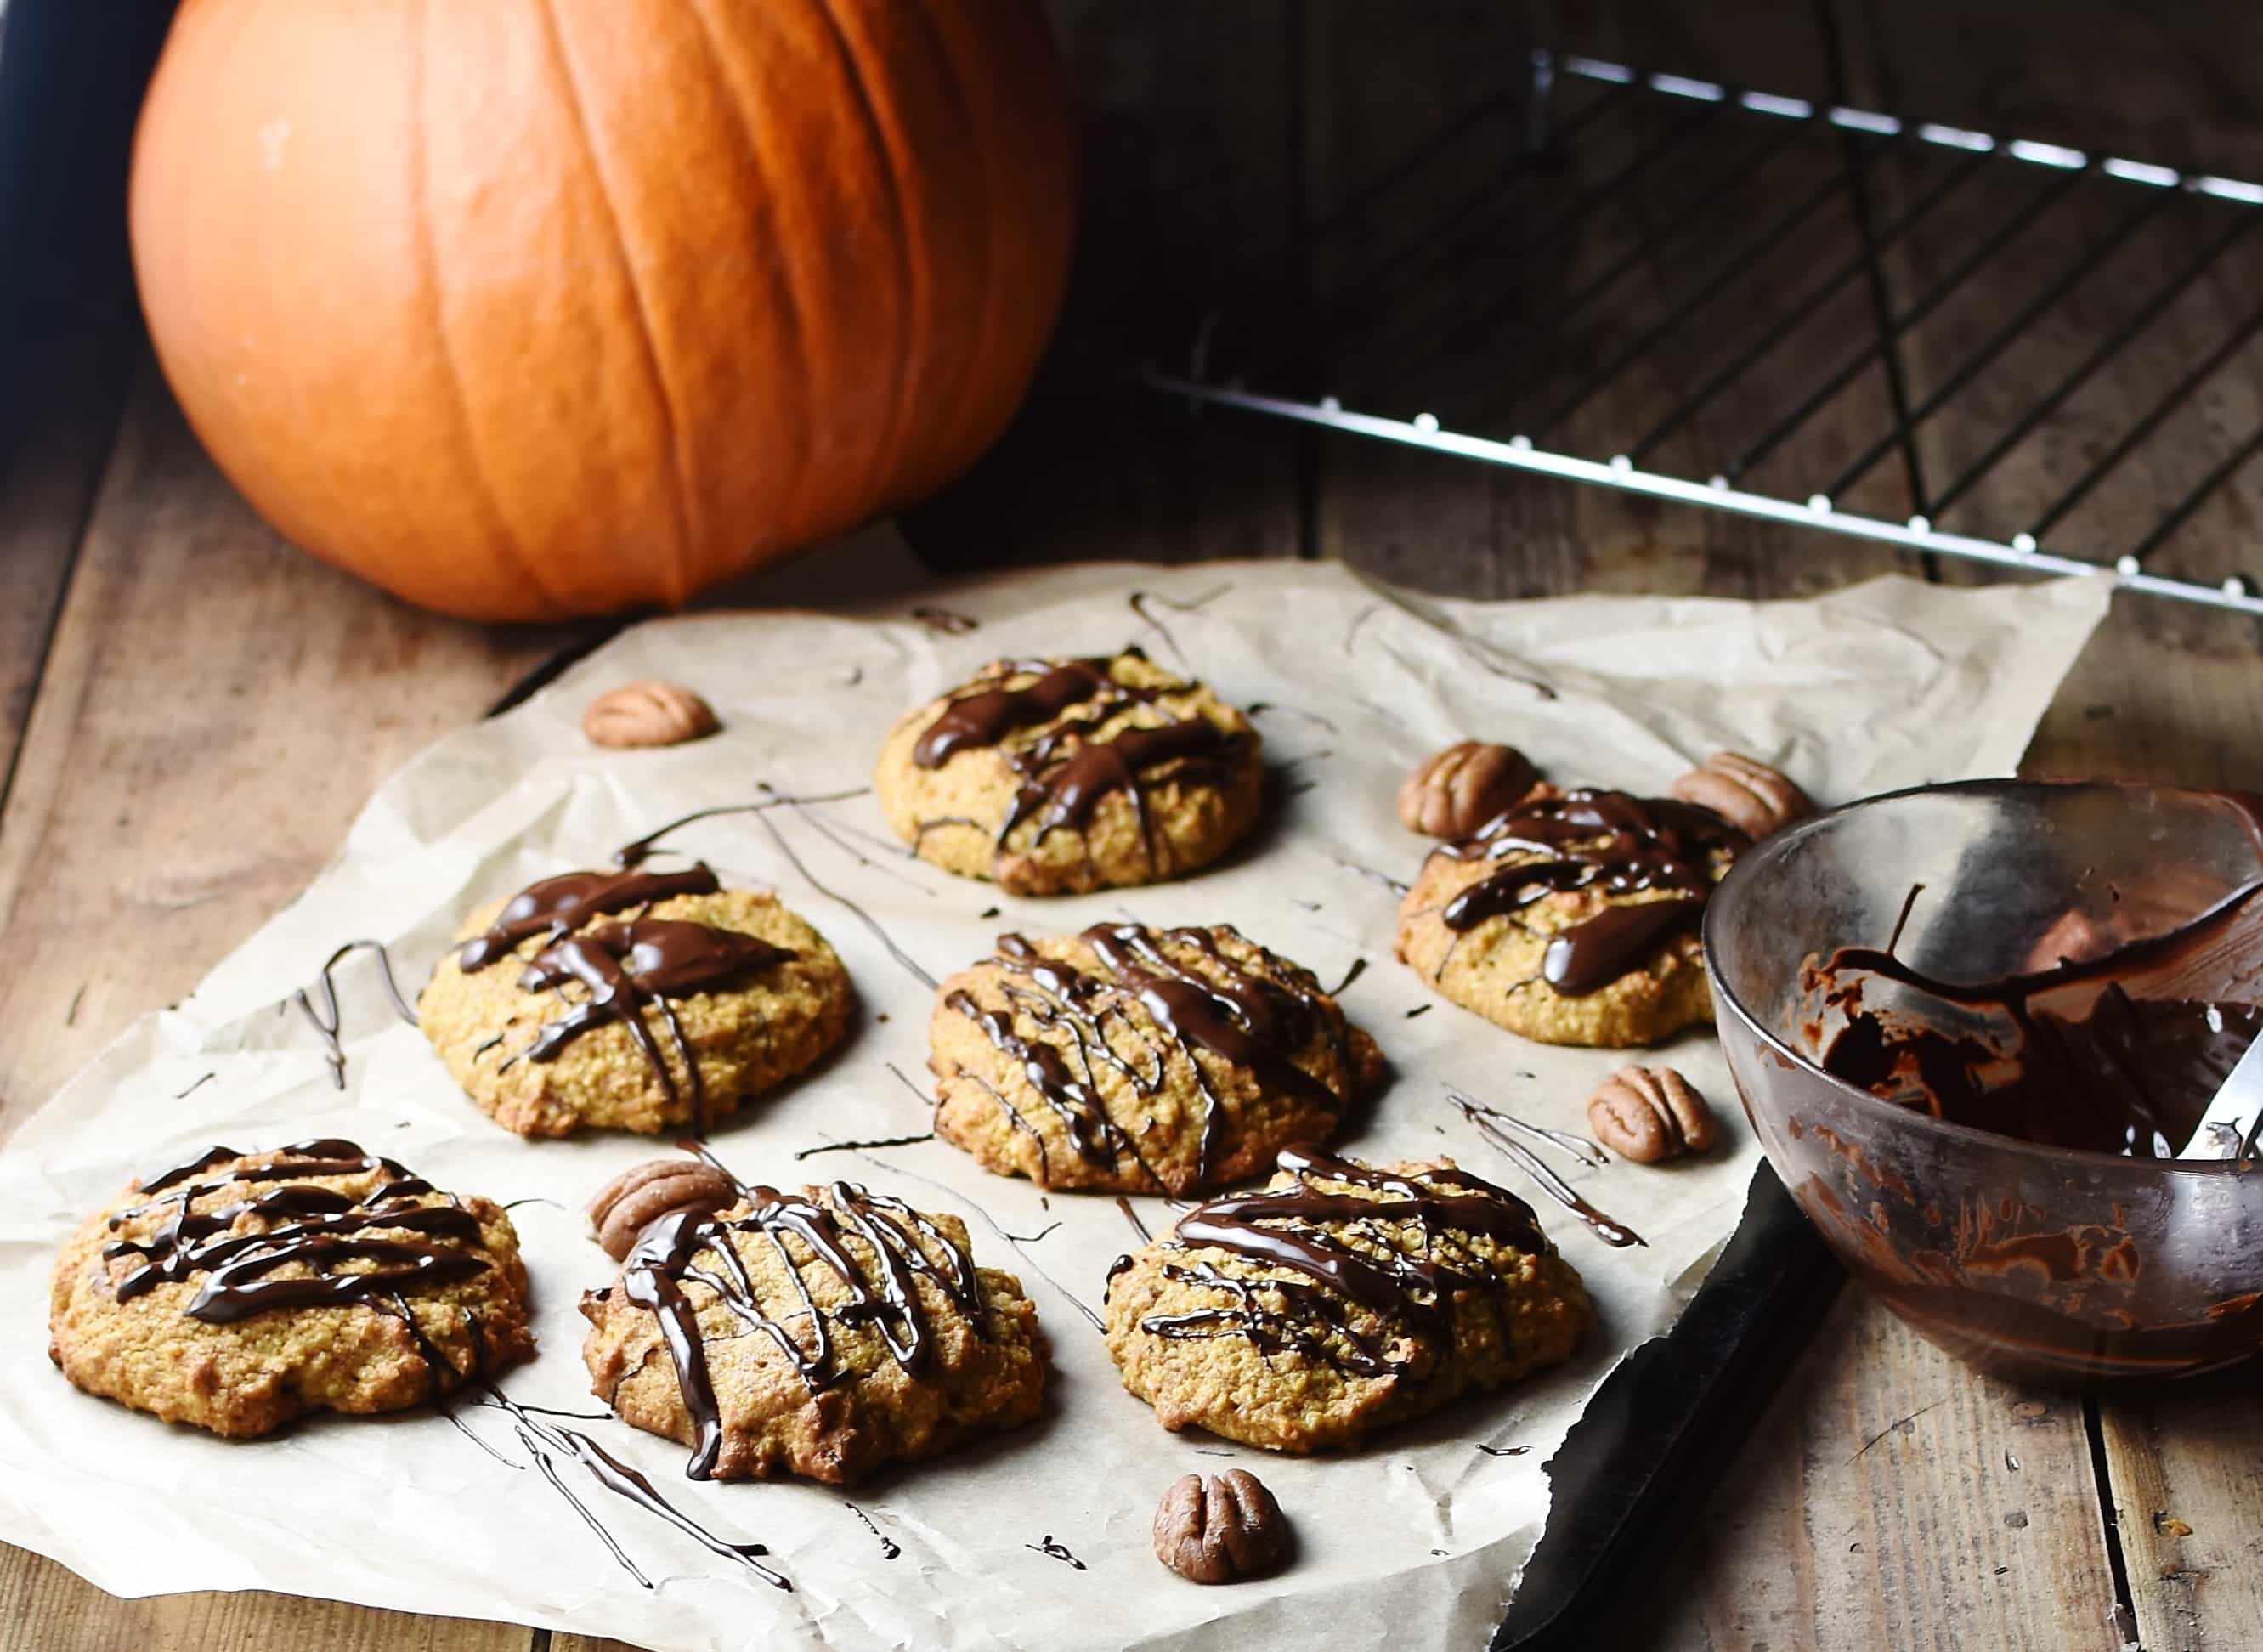 Pumpkin cookies with chocolate drizzle on top of paper with pecans, and pumpkin in background.